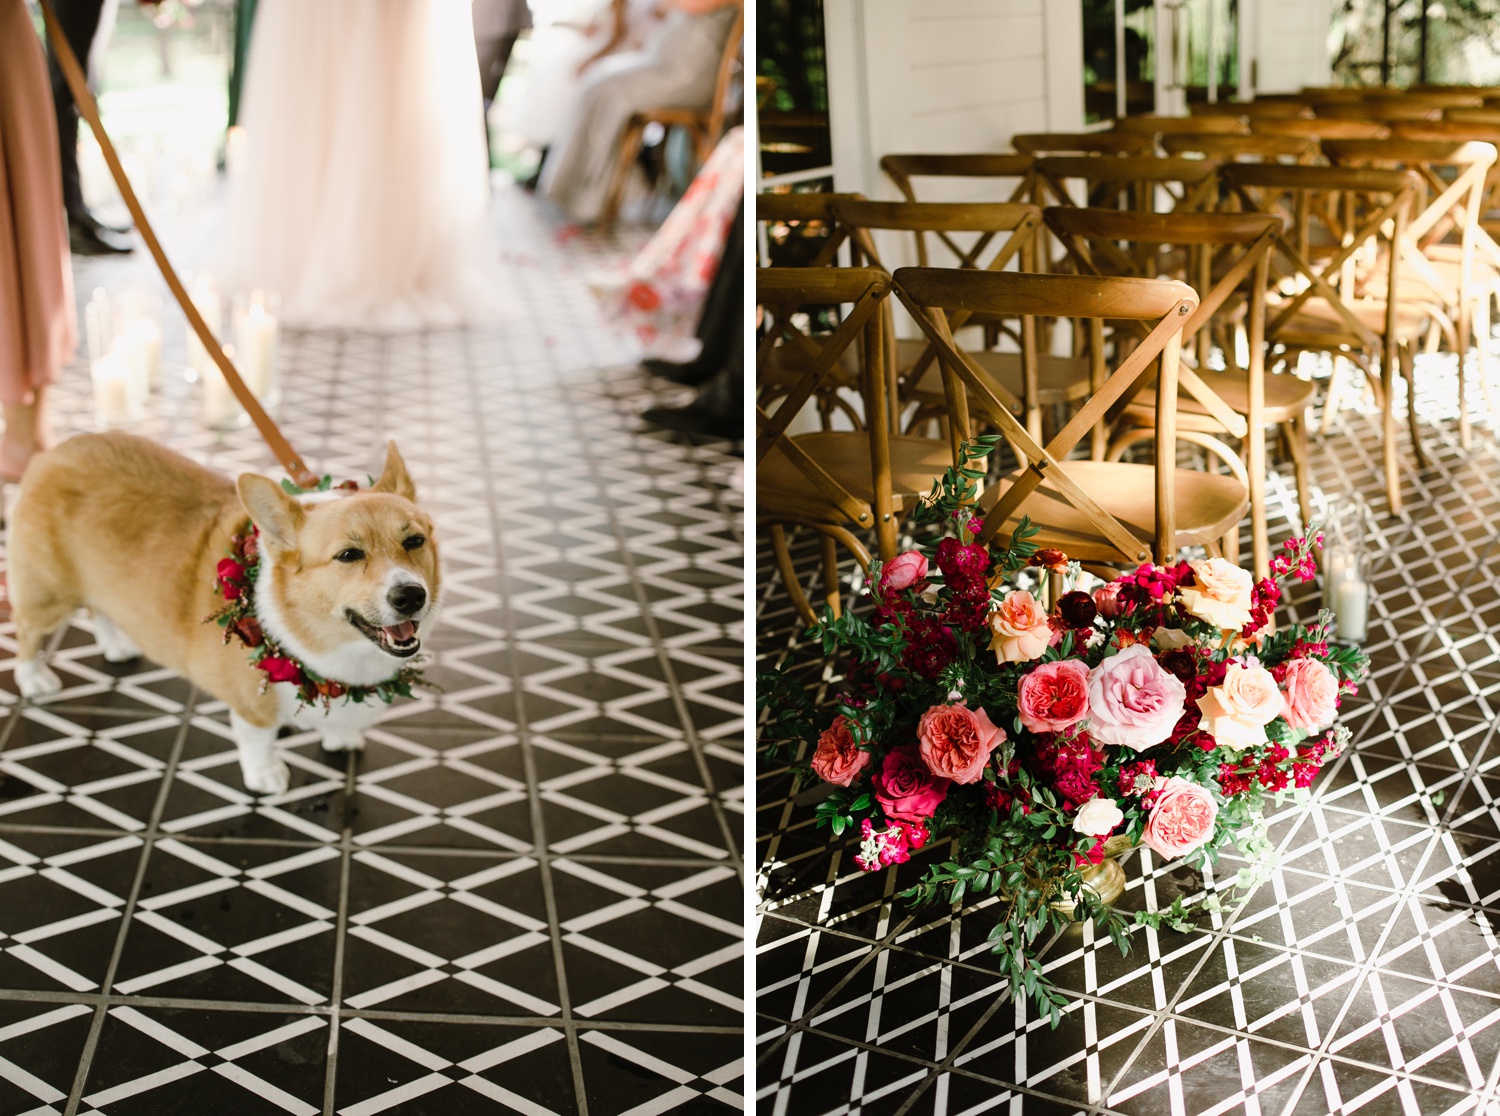 Bride and groom walking down the aisle with their pet corgis